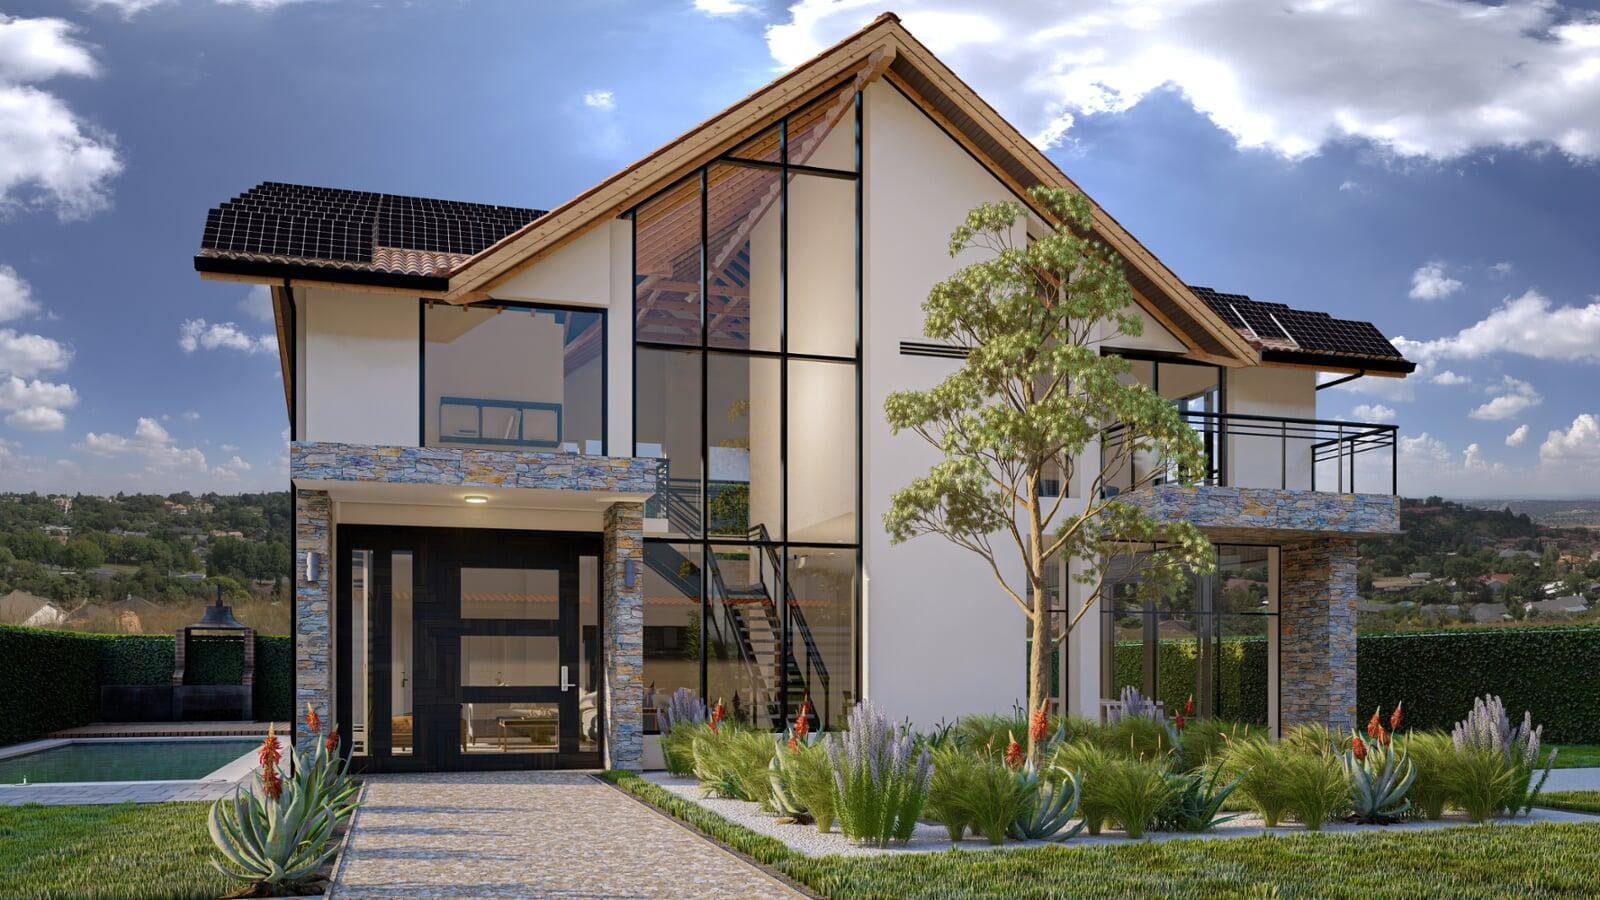 Real Estate Architecture 3D Rendering